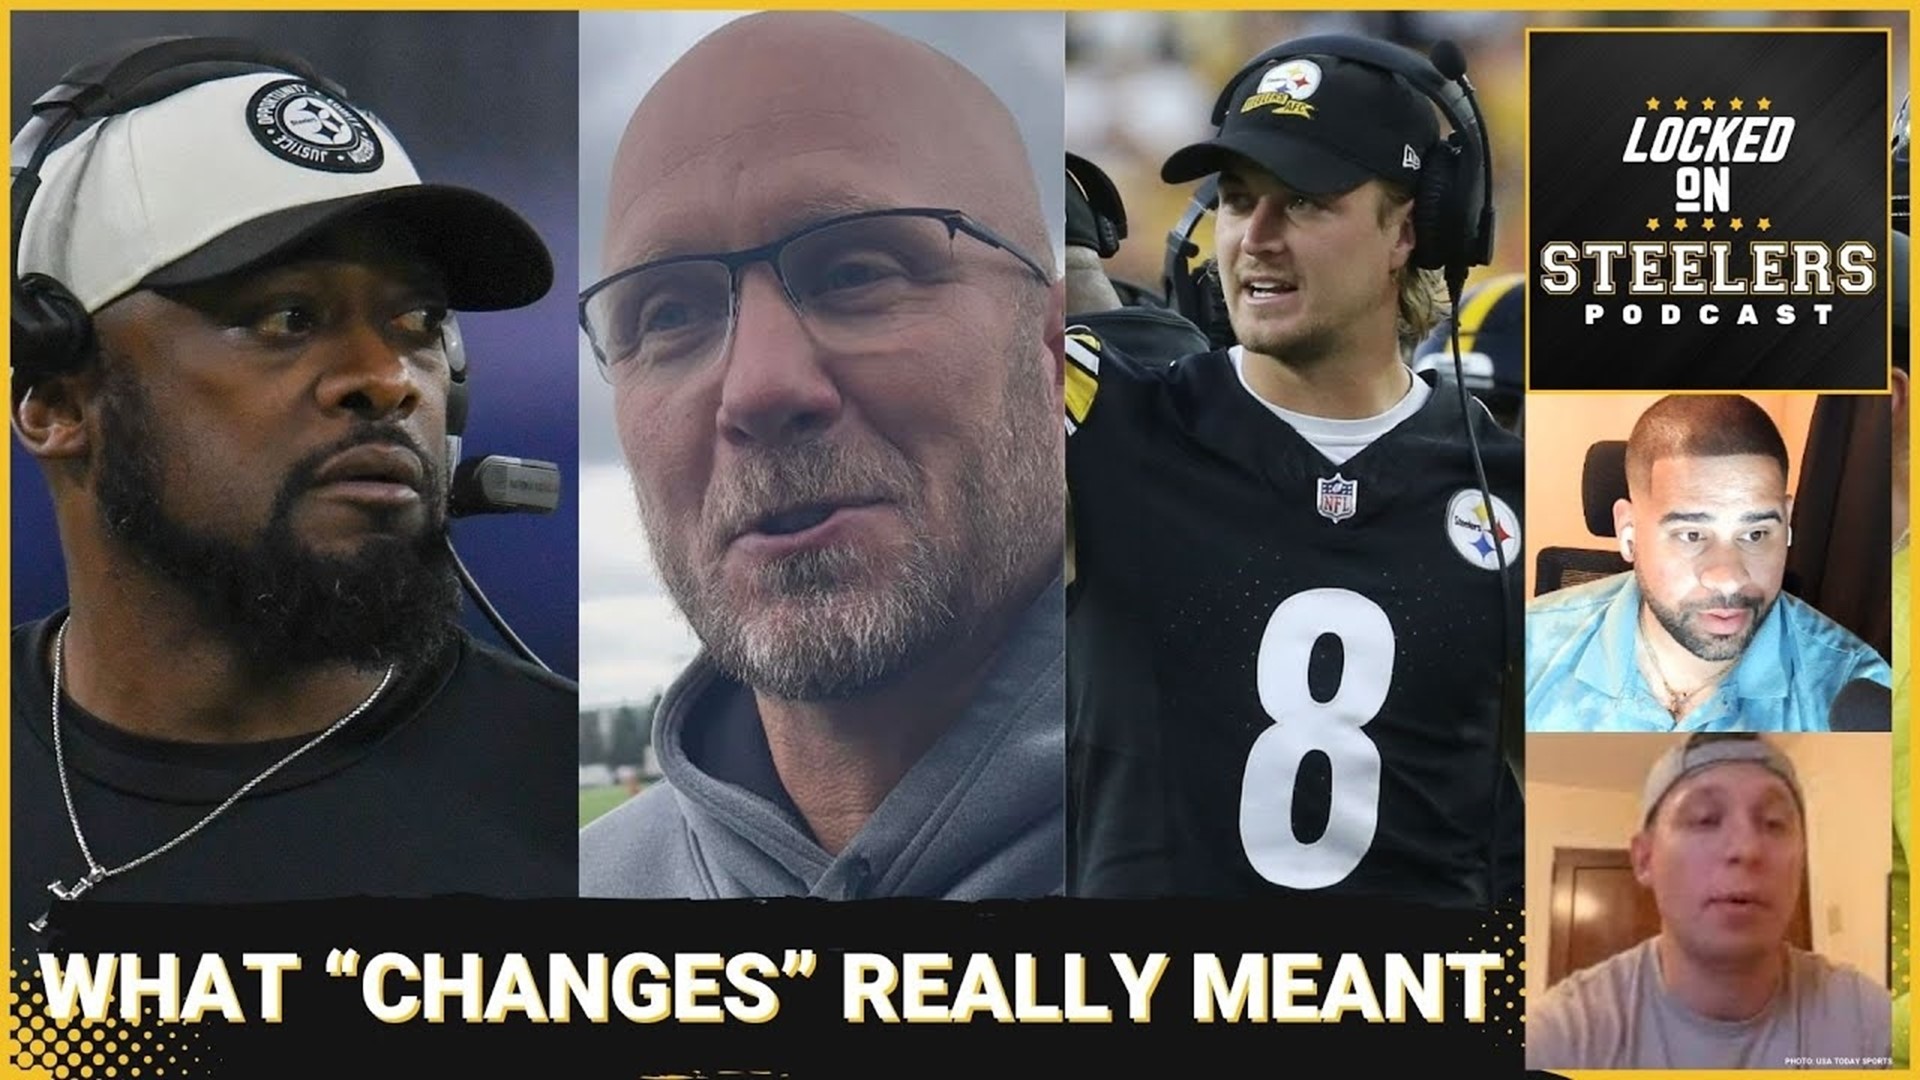 The Pittsburgh Steelers' head coach Mike Tomlin indicated offensive coordinator Matt Canada isn't getting fired or removed from play-calling duties.